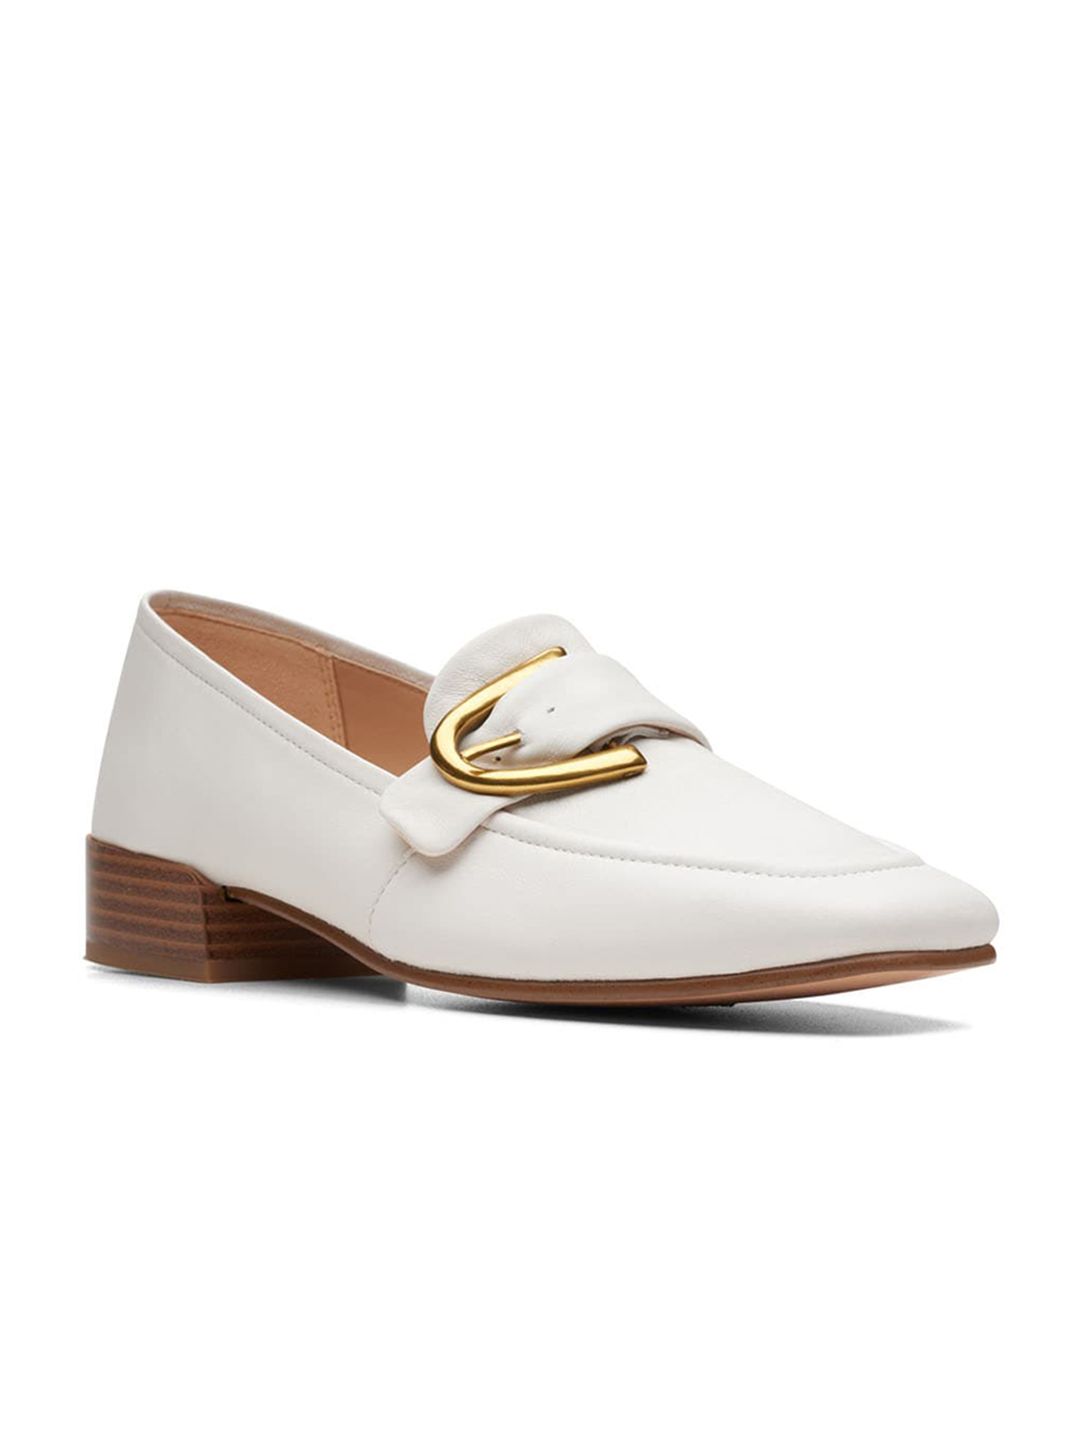 Clarks Women White Leather Loafers Price in India